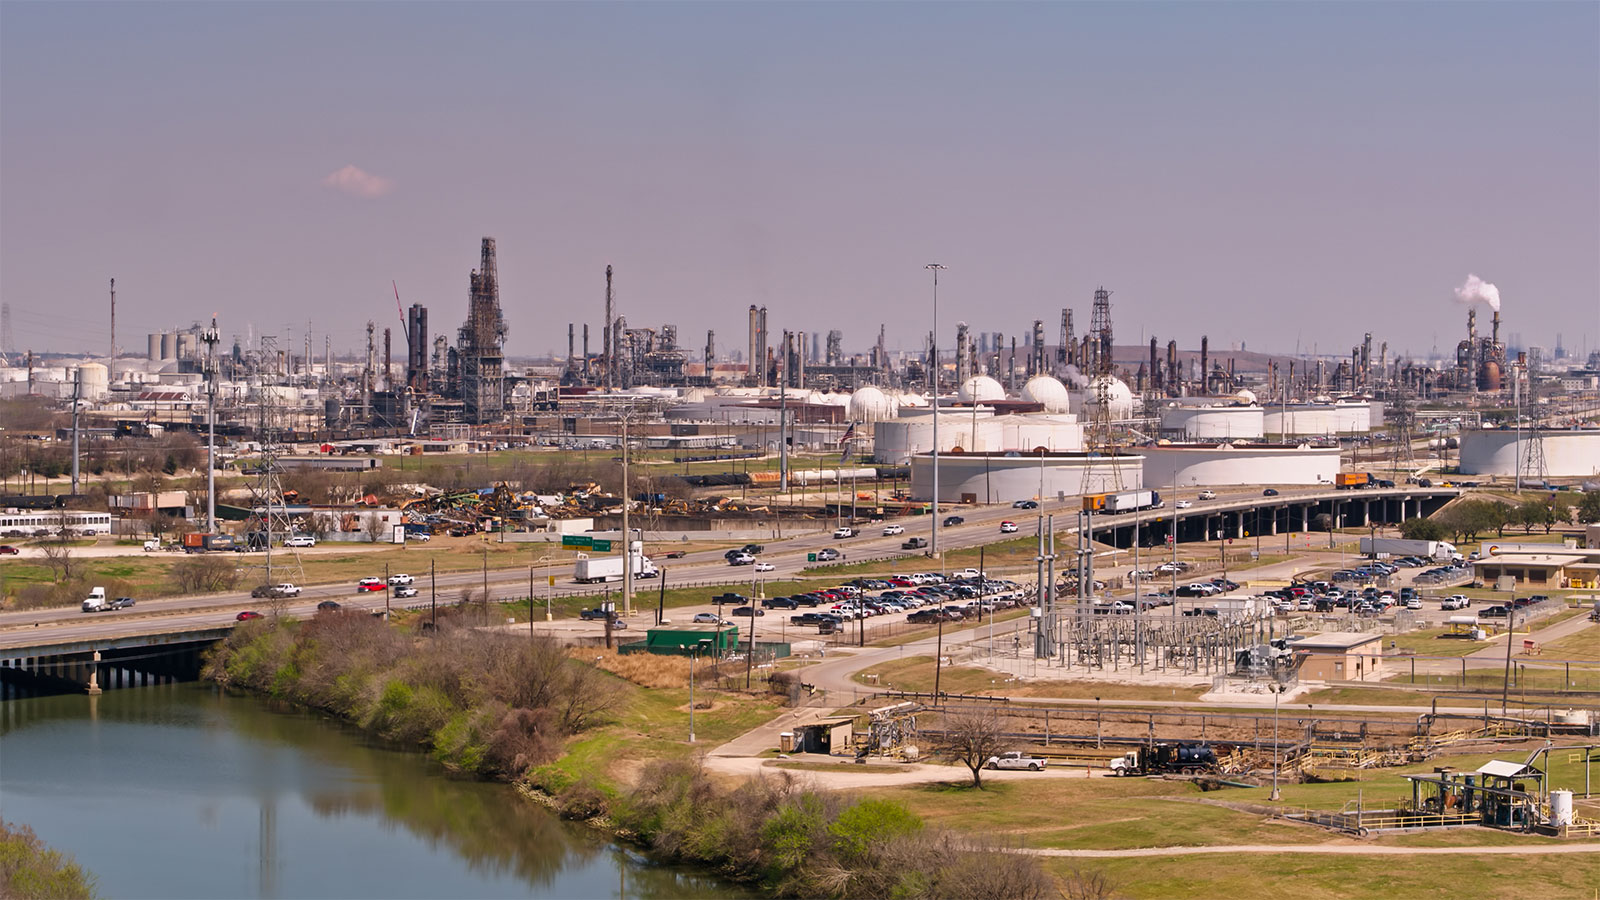 aerial view of petrochemical plants in Houston, Texas